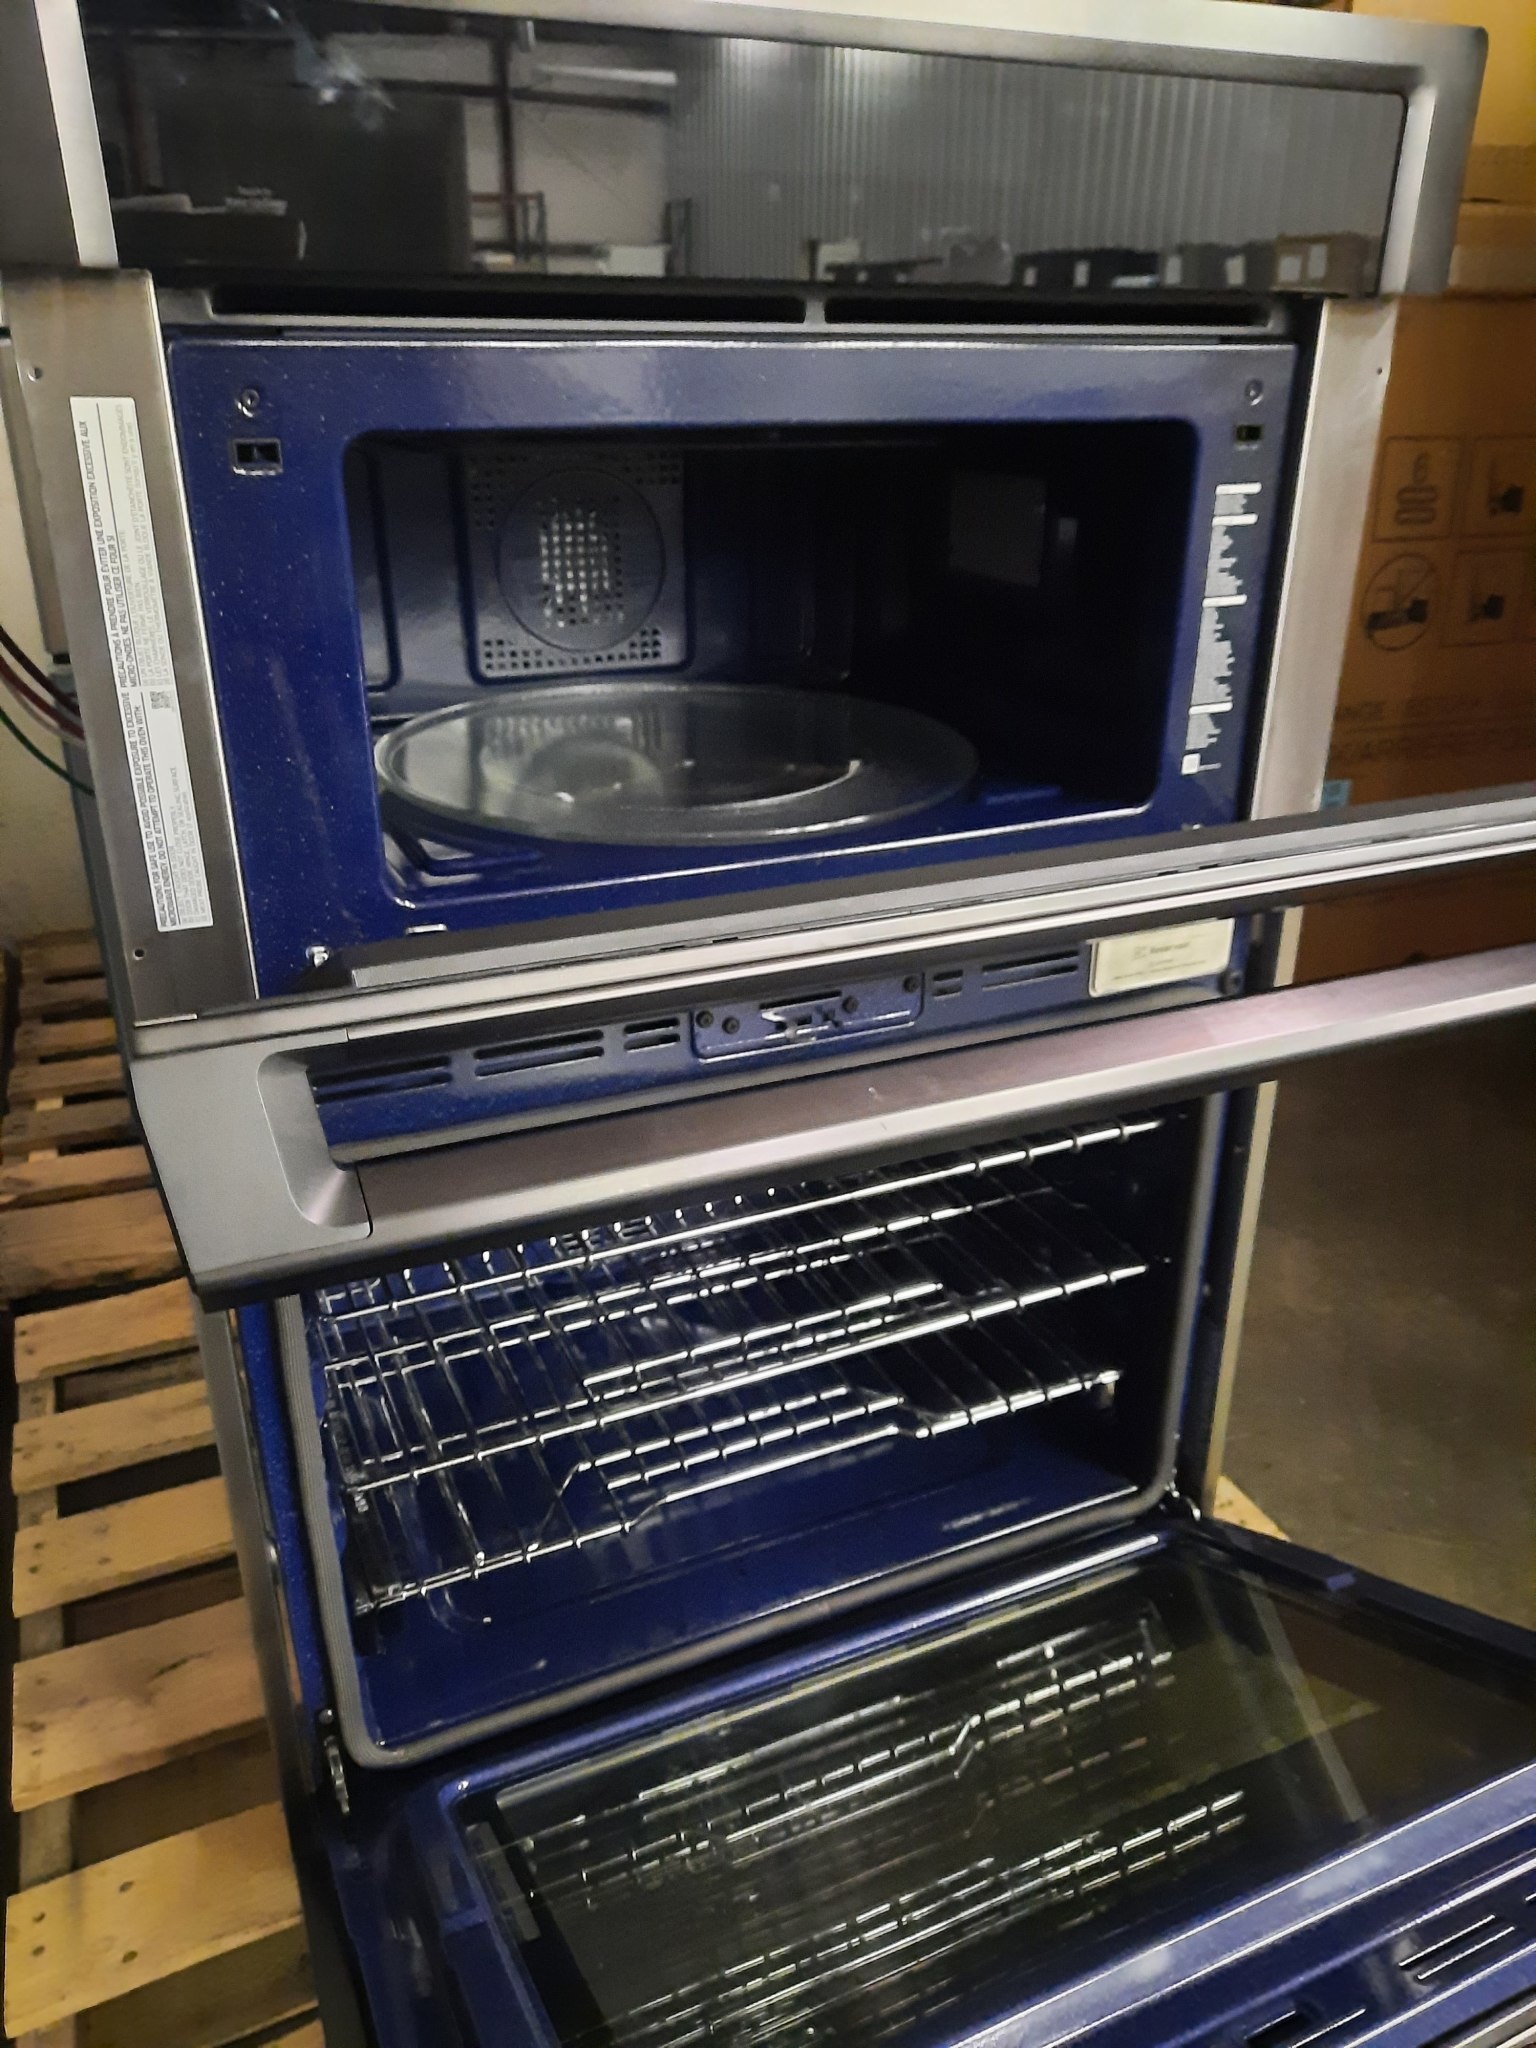 Samsung 30 Microwave Combination Wall Oven with Steam Cook